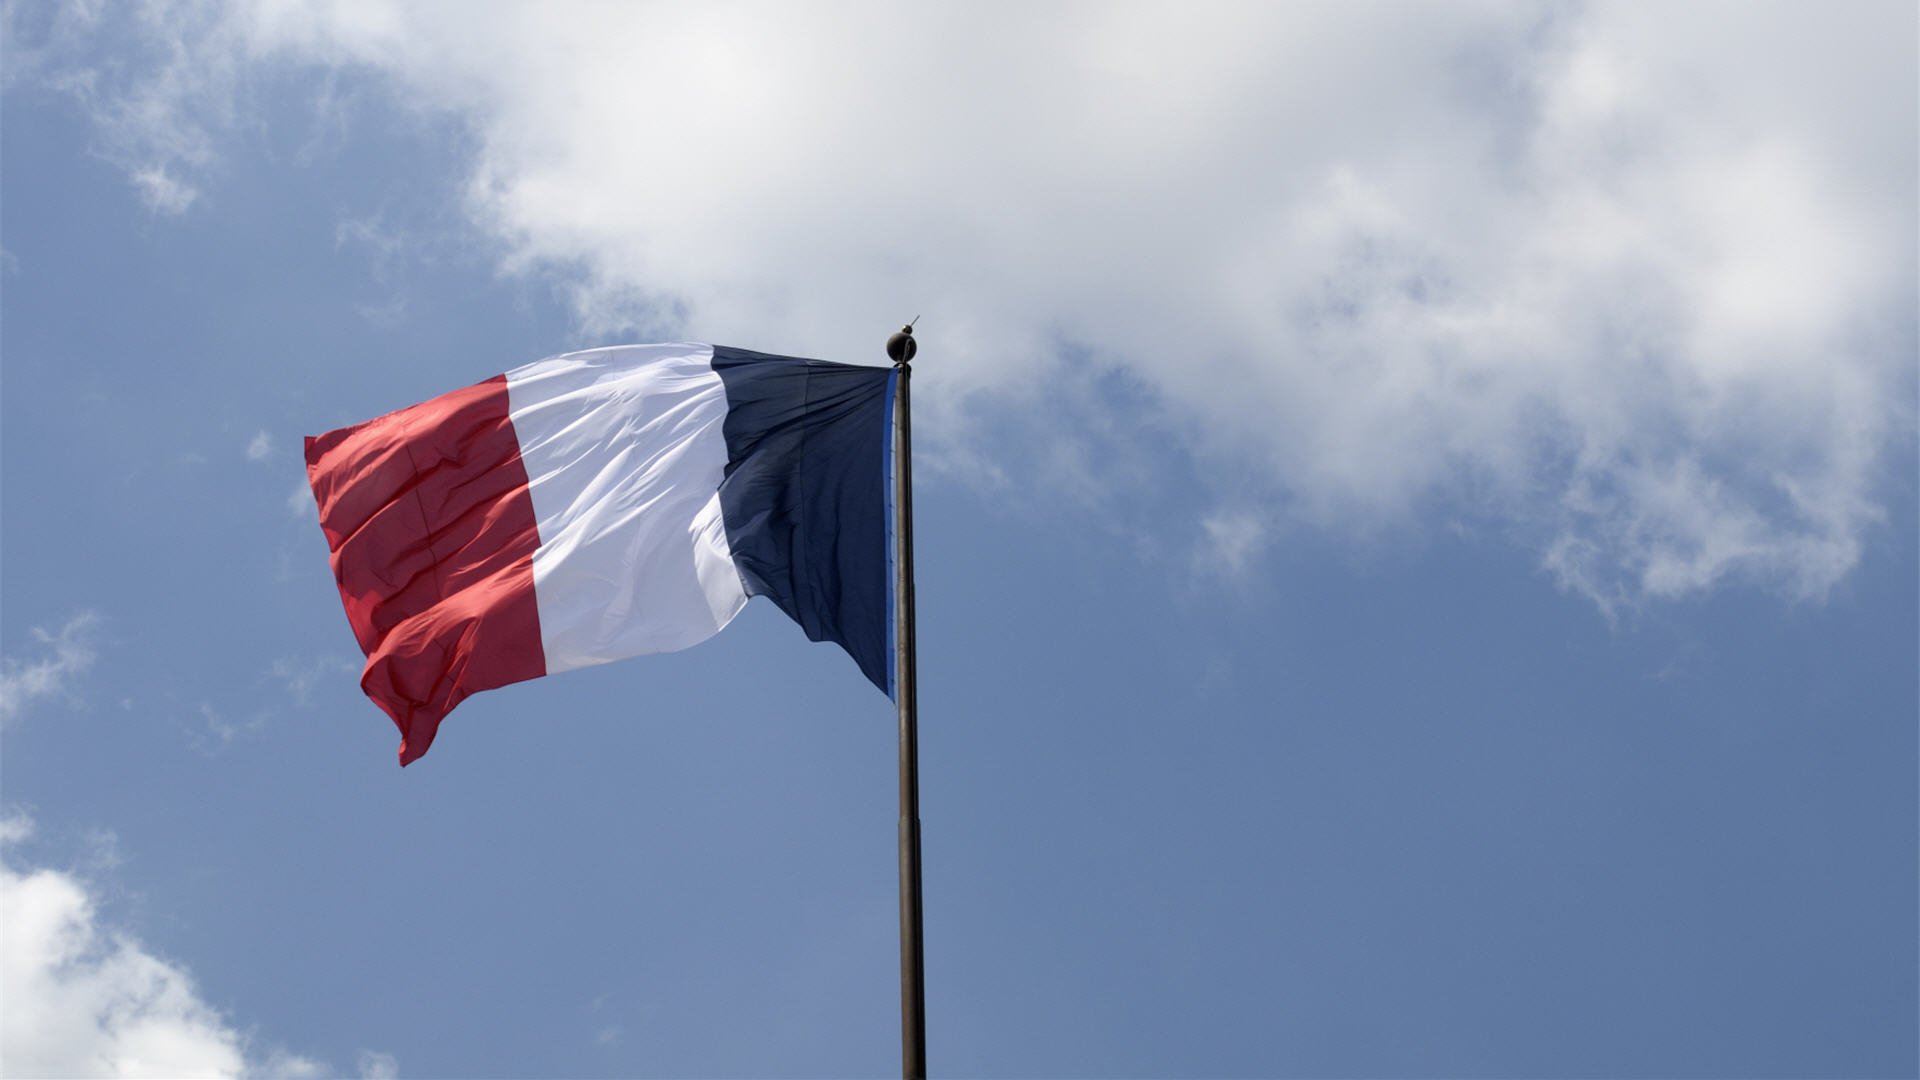 Flags Resolution Wallpaper High Flag French Logos National Albums Jpg